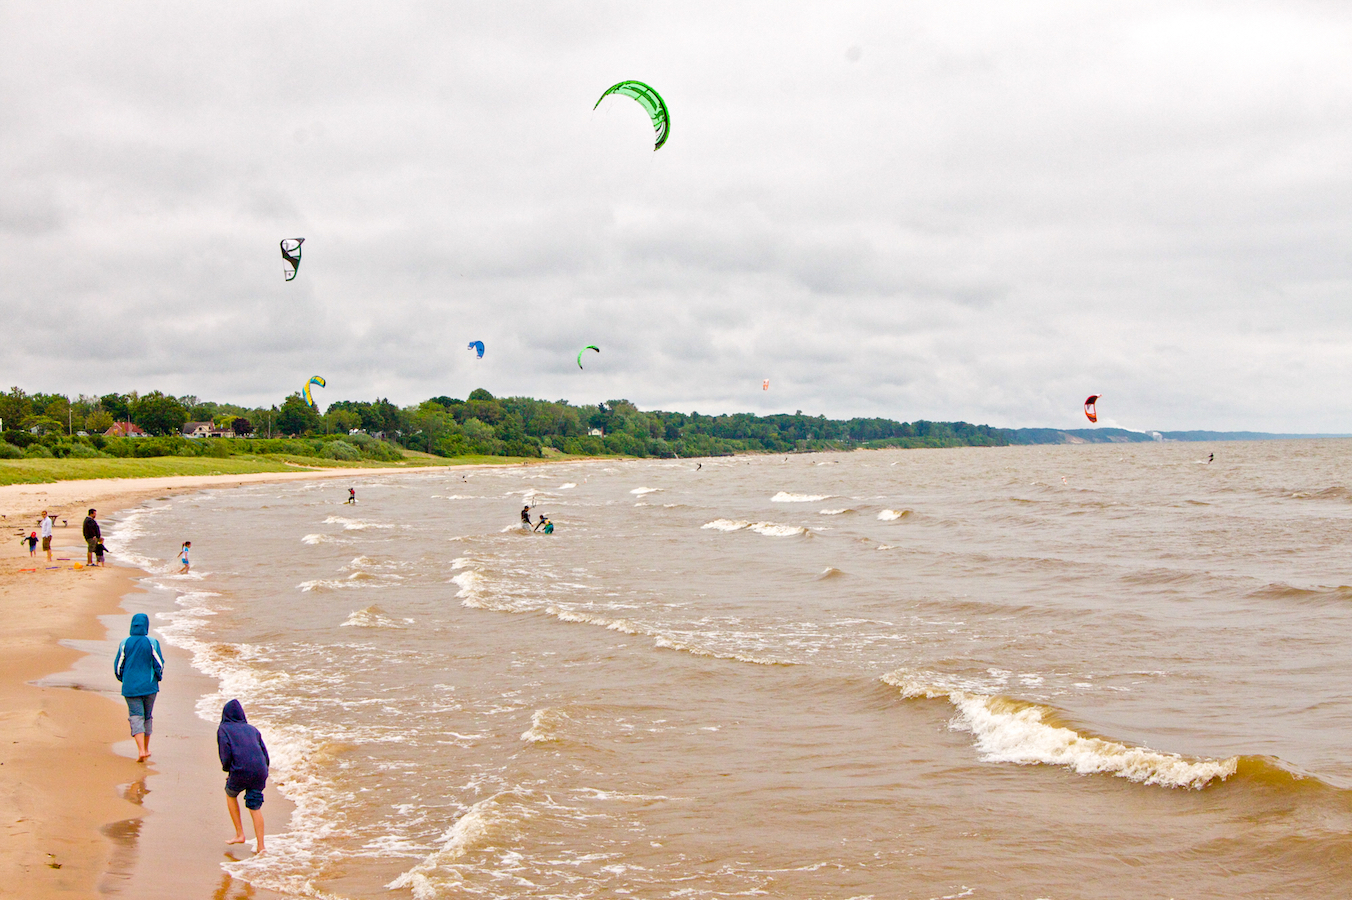 Beach photo with people and kites, used for object detection